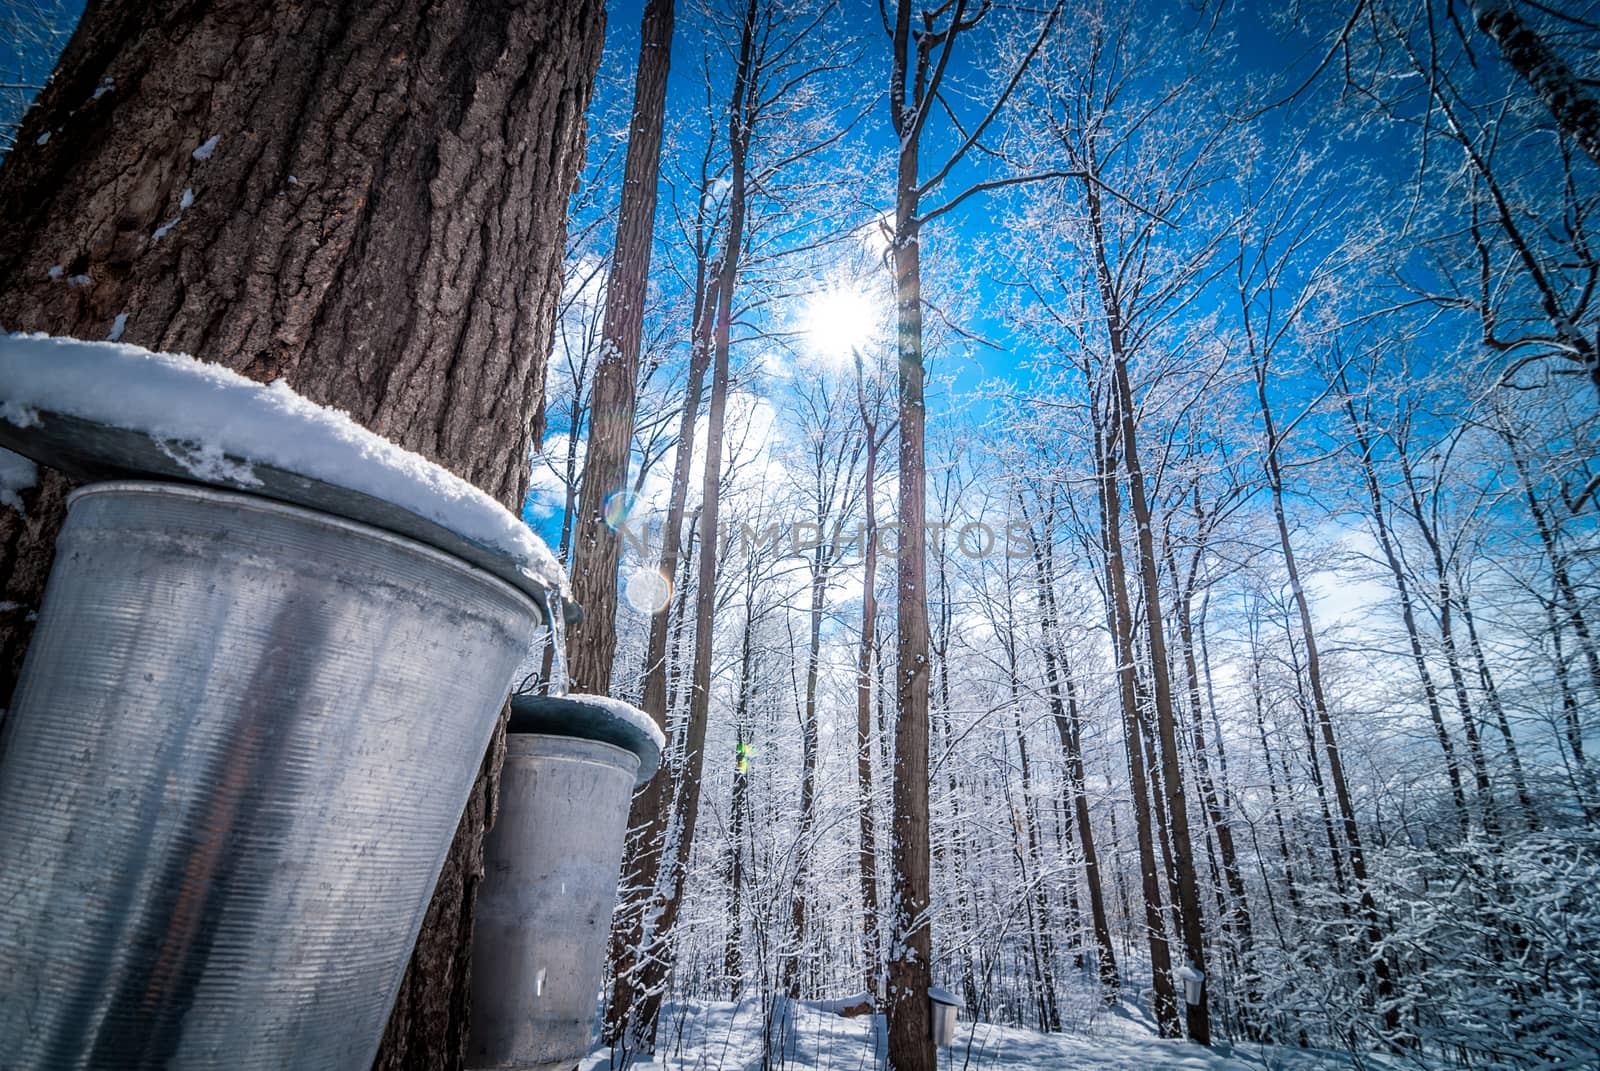 Two buckets await the right time for their content of sap to arrive.